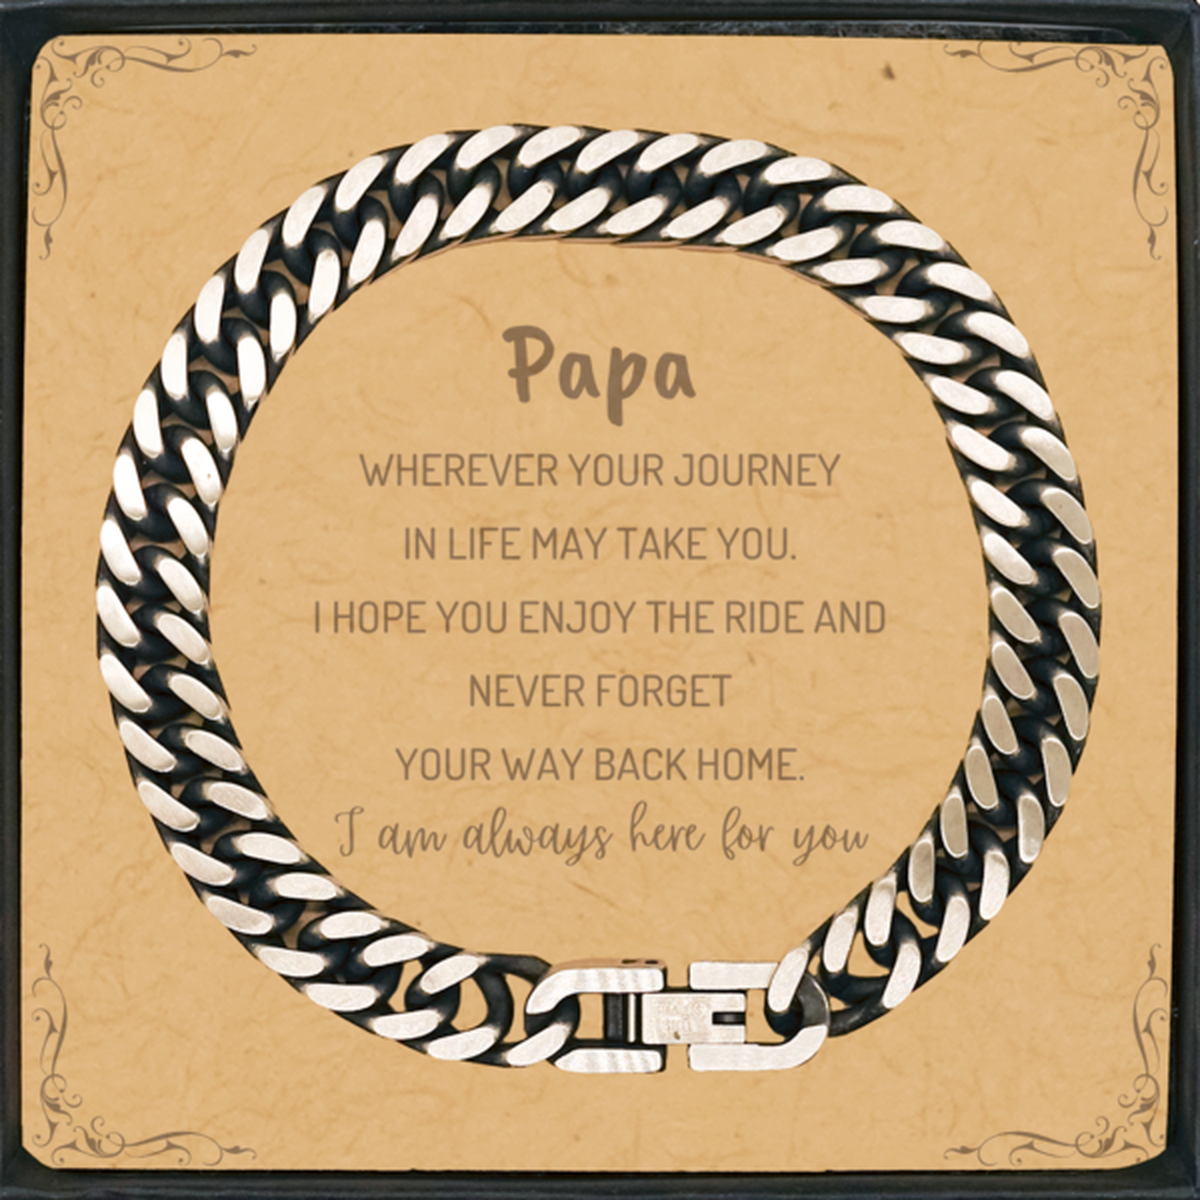 Papa wherever your journey in life may take you, I am always here for you Papa Cuban Link Chain Bracelet, Awesome Christmas Gifts For Papa Message Card, Papa Birthday Gifts for Men Women Family Loved One